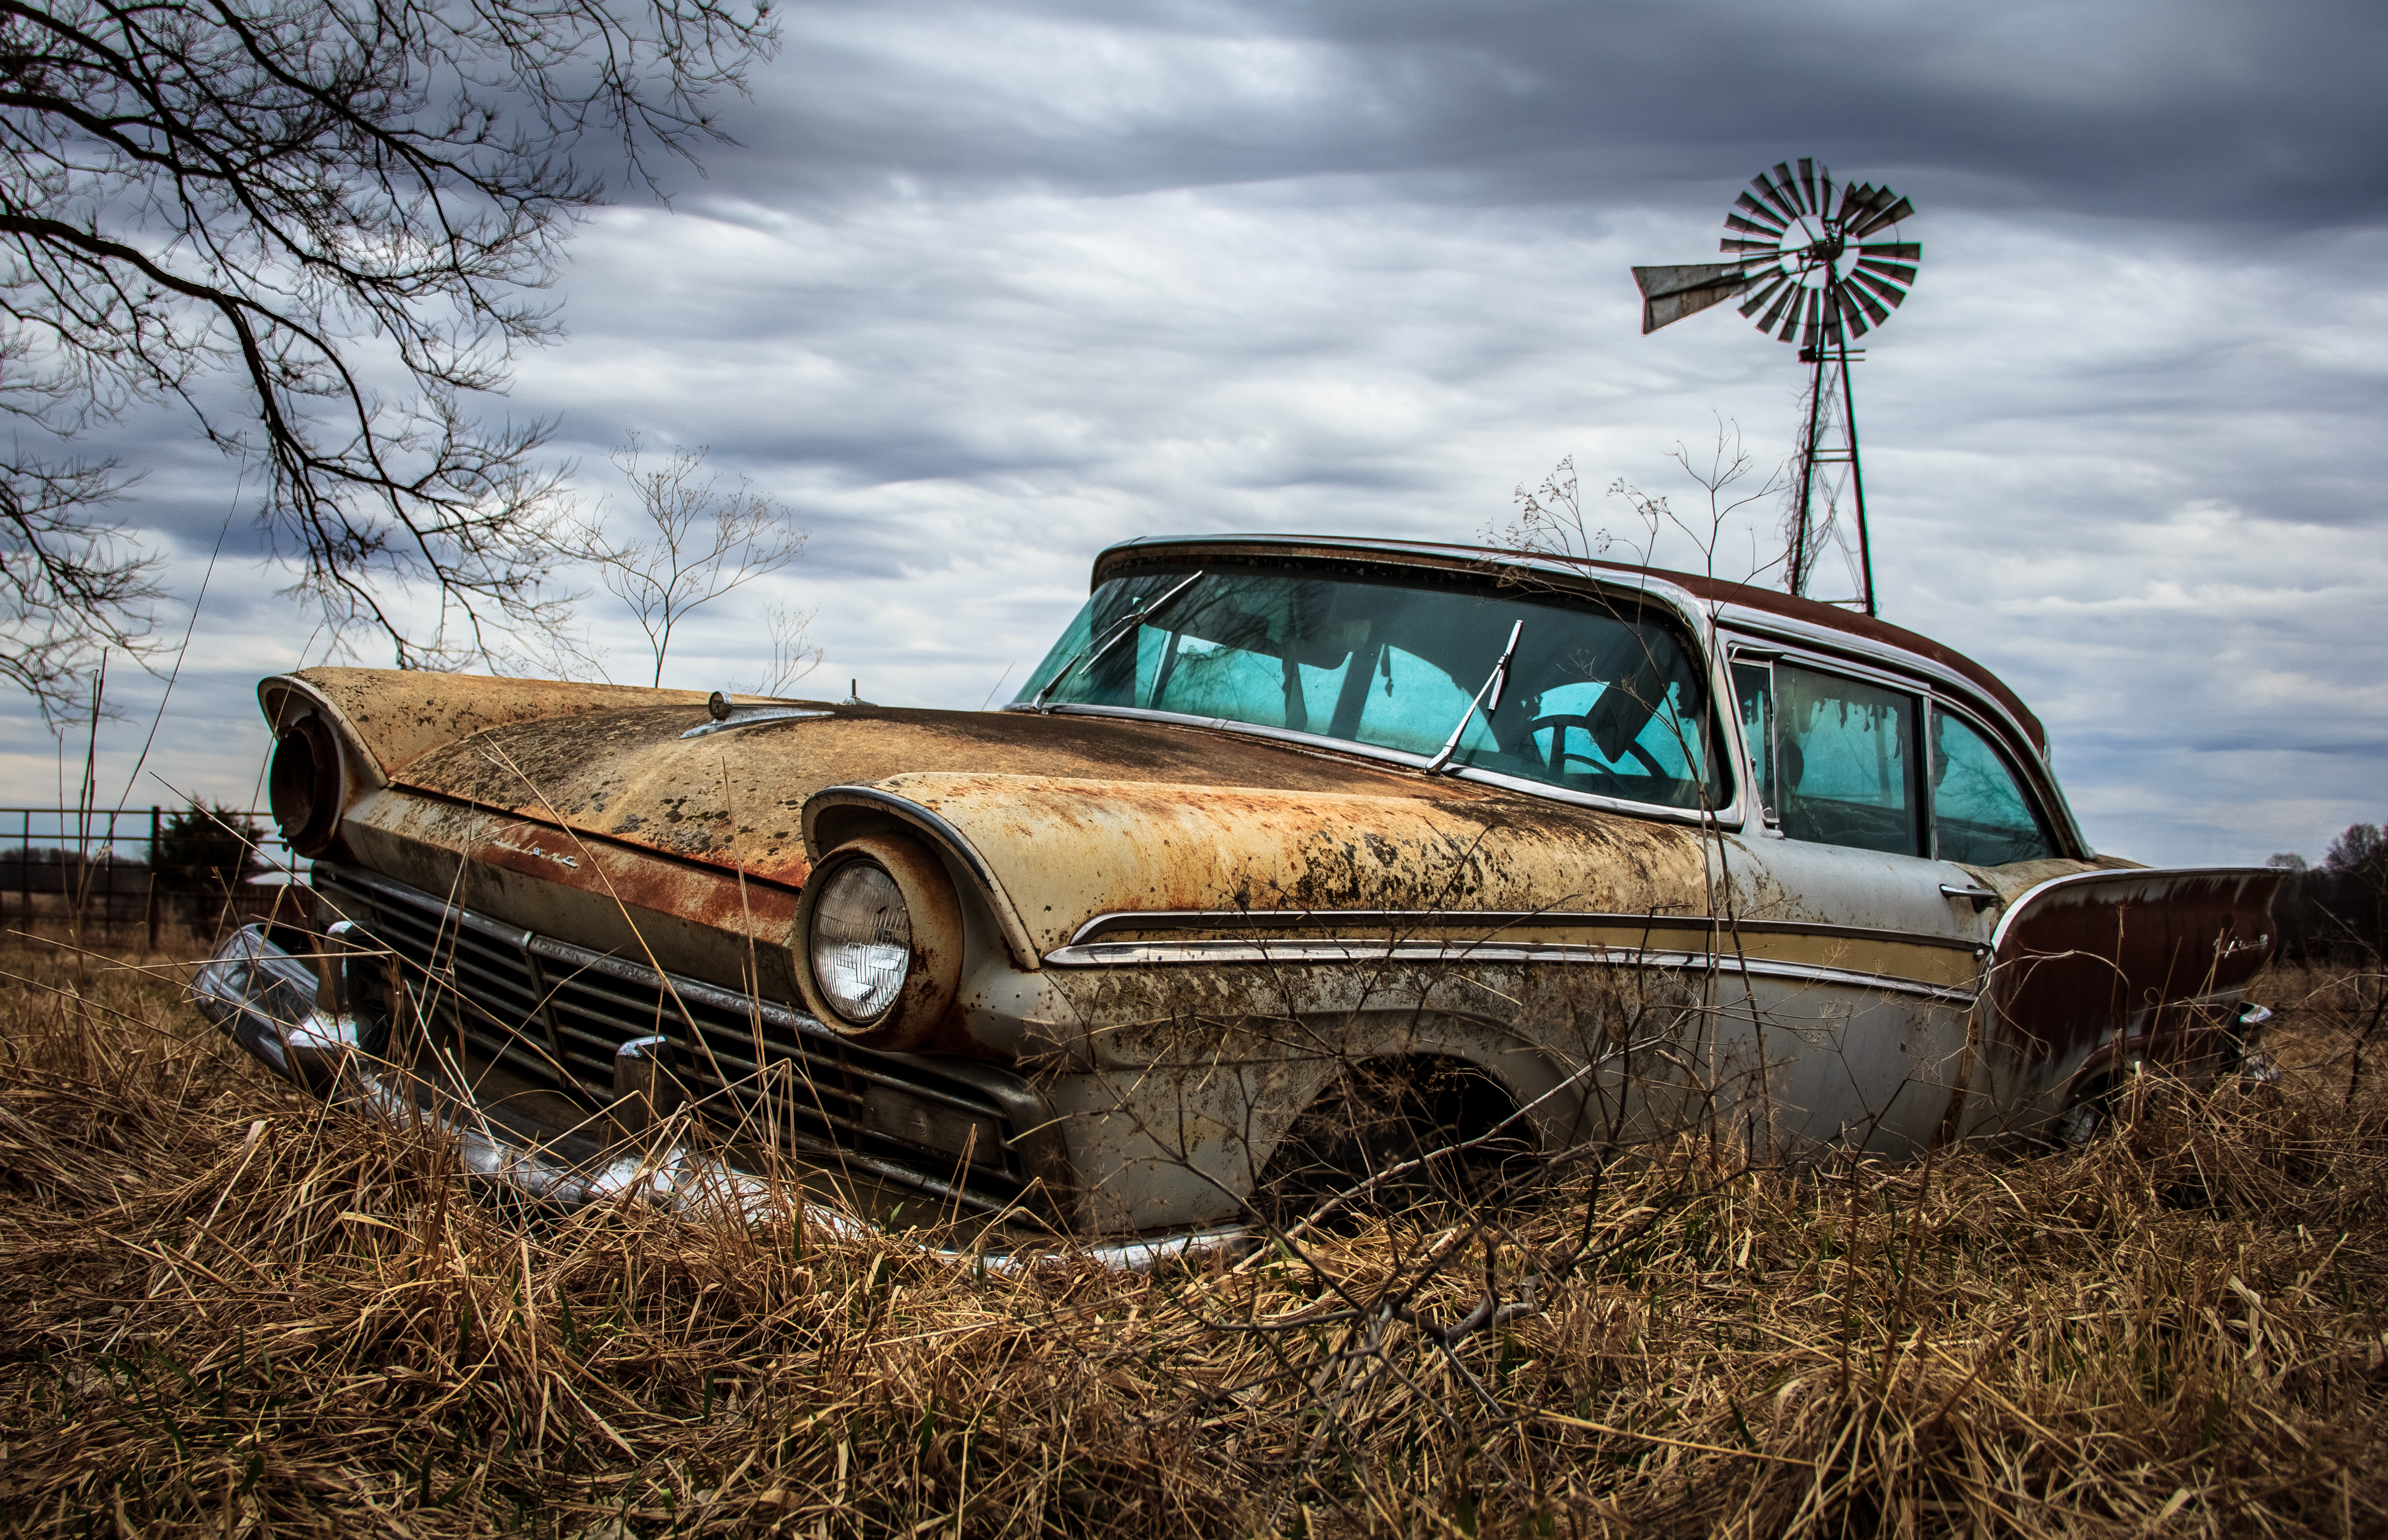 Wallpaper, galaxy, abandoned, windmill, Ford, decay, Vintage car, rural, rusty, missouri, classic, land vehicle, automotive design, automobile make, luxury vehicle, motor vehicle, antique car 4856x3132